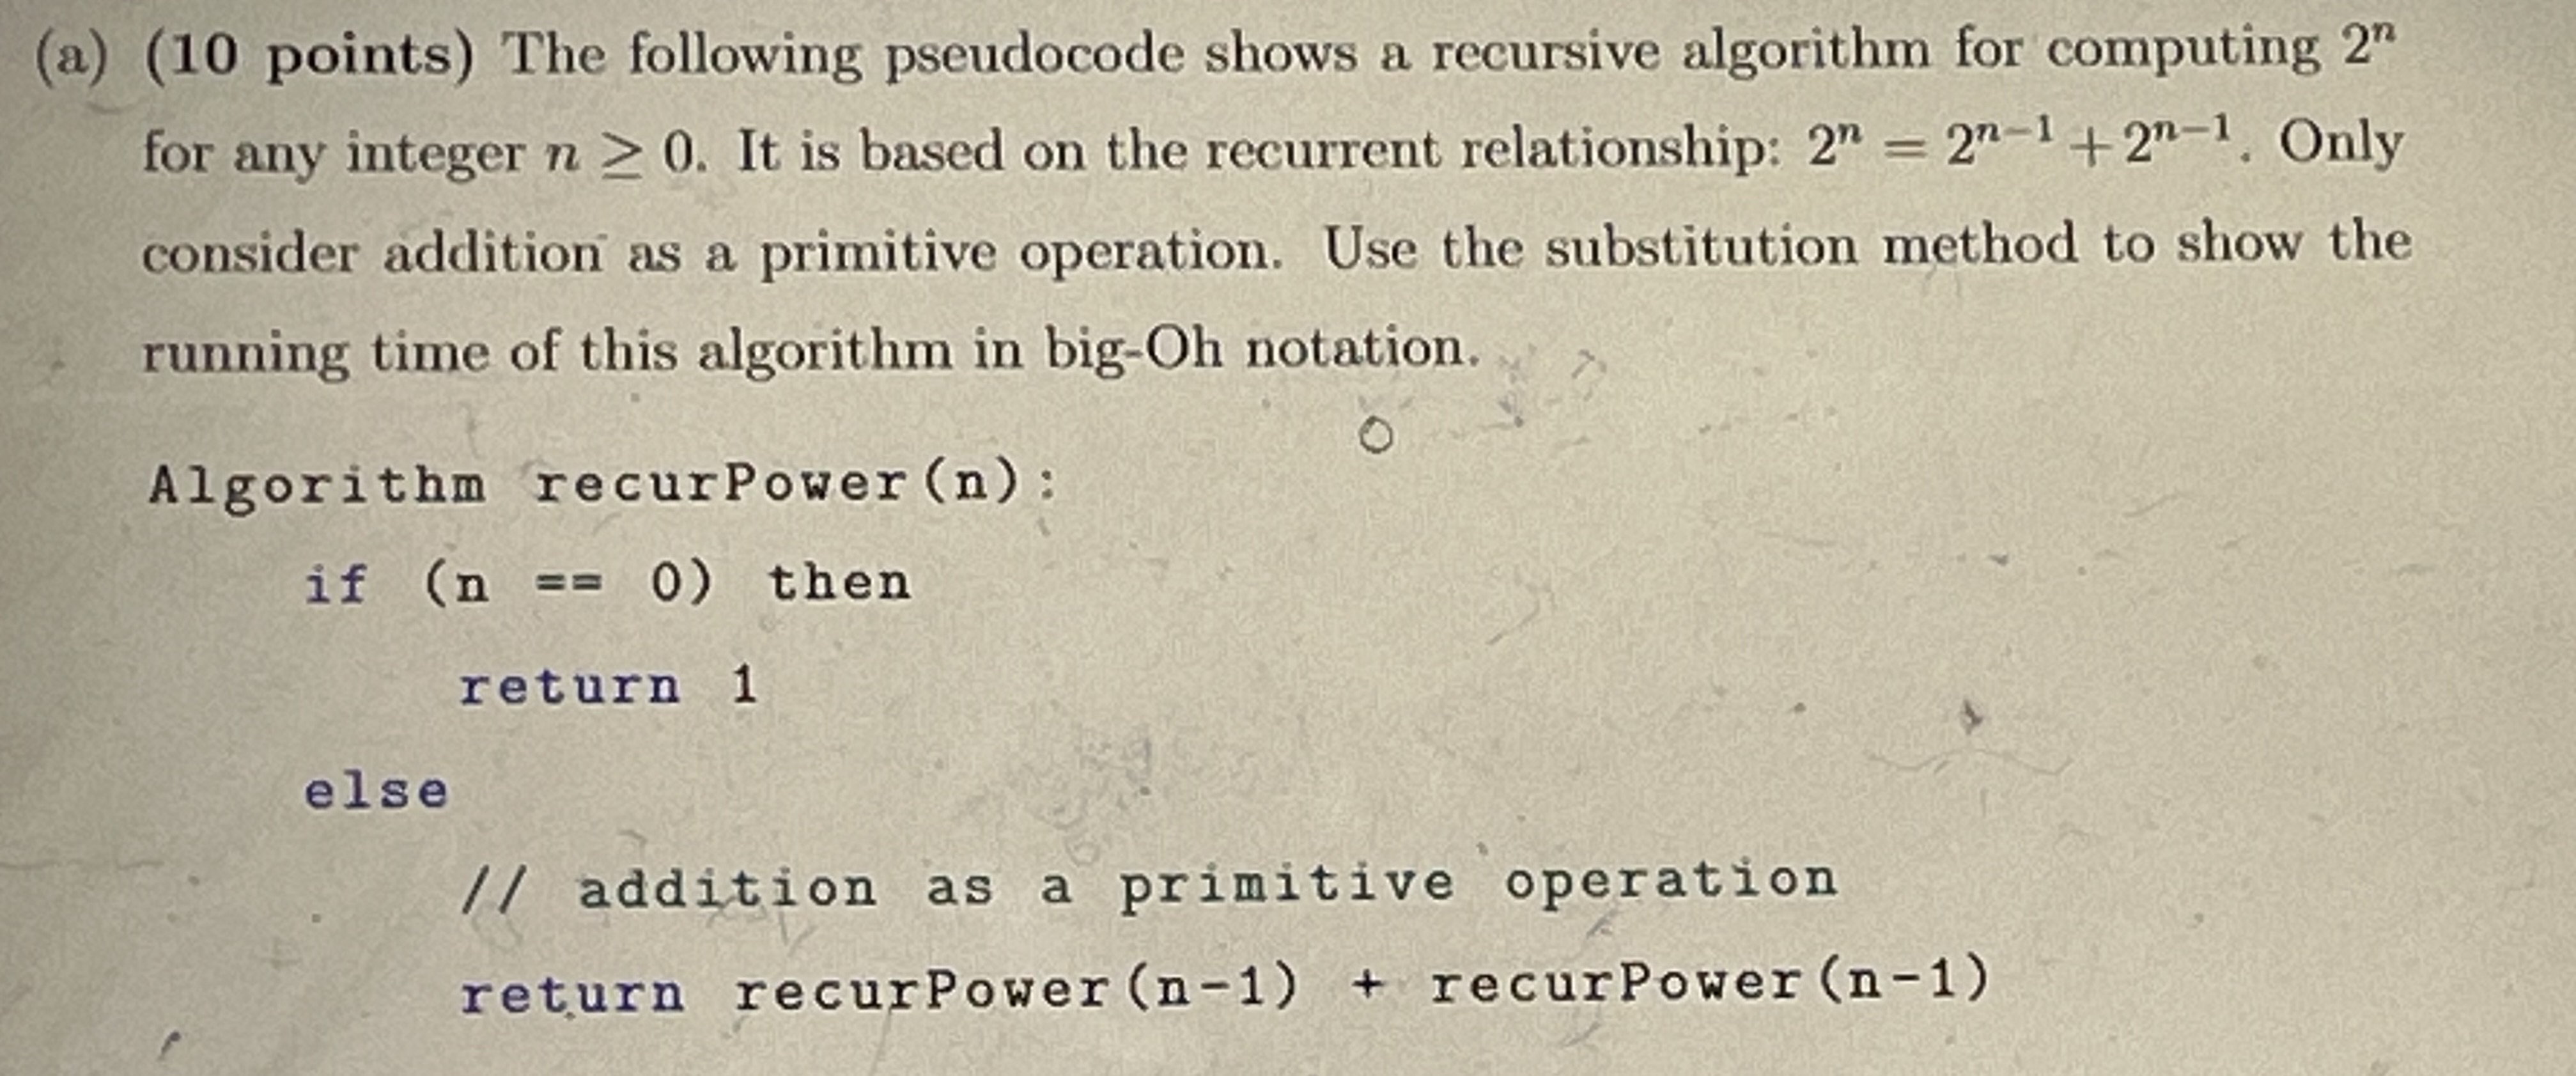 (a) (10 points) The following pseudocode shows a recursive algorithm for computing 2